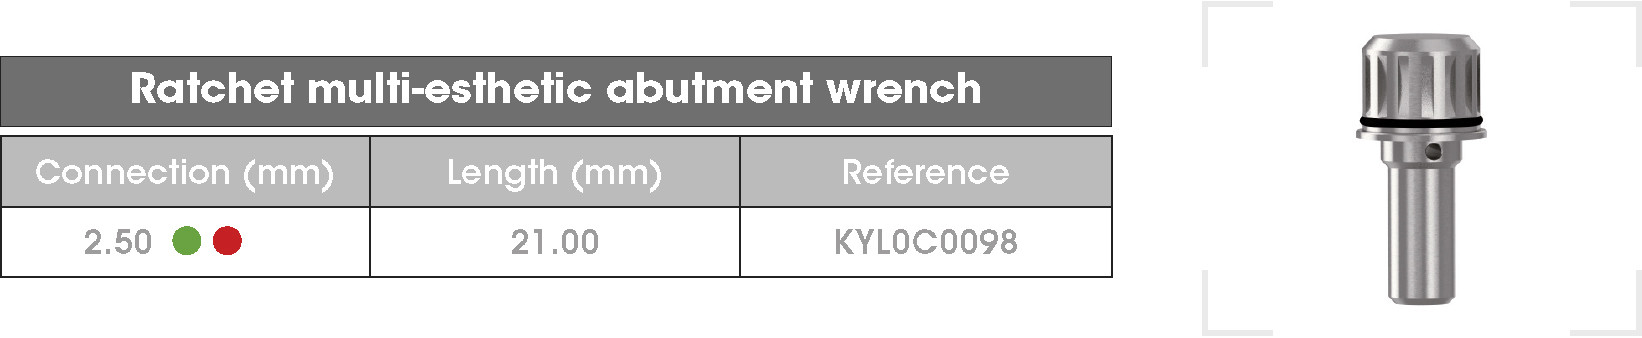 ME abutment wrench